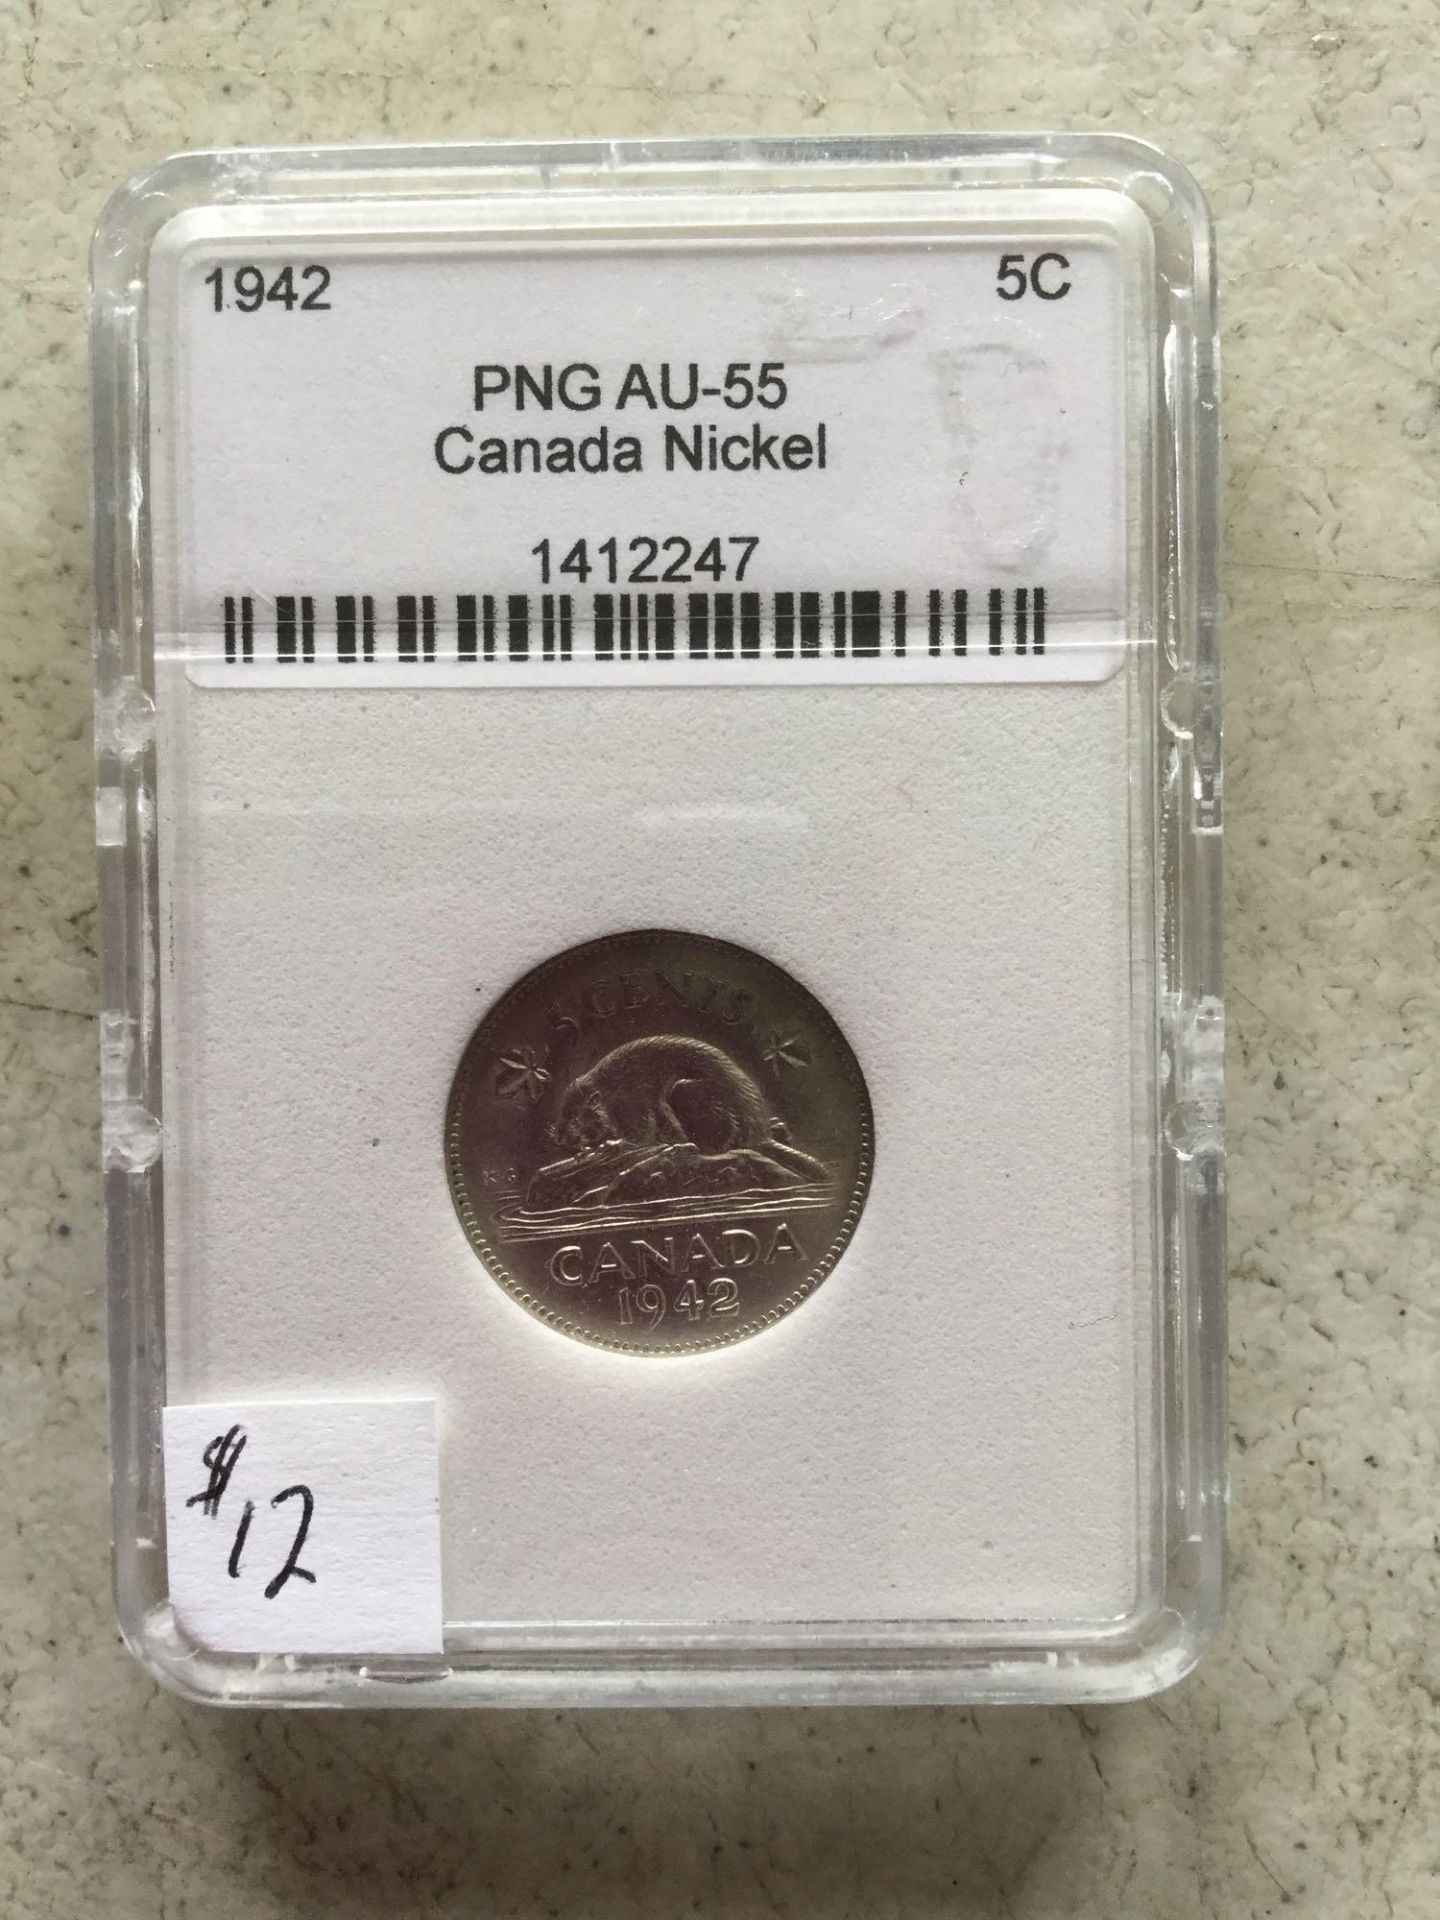 1942- Royal Canadian Mint 5 cent coin - PNG EF-40 CANADA NICKEL